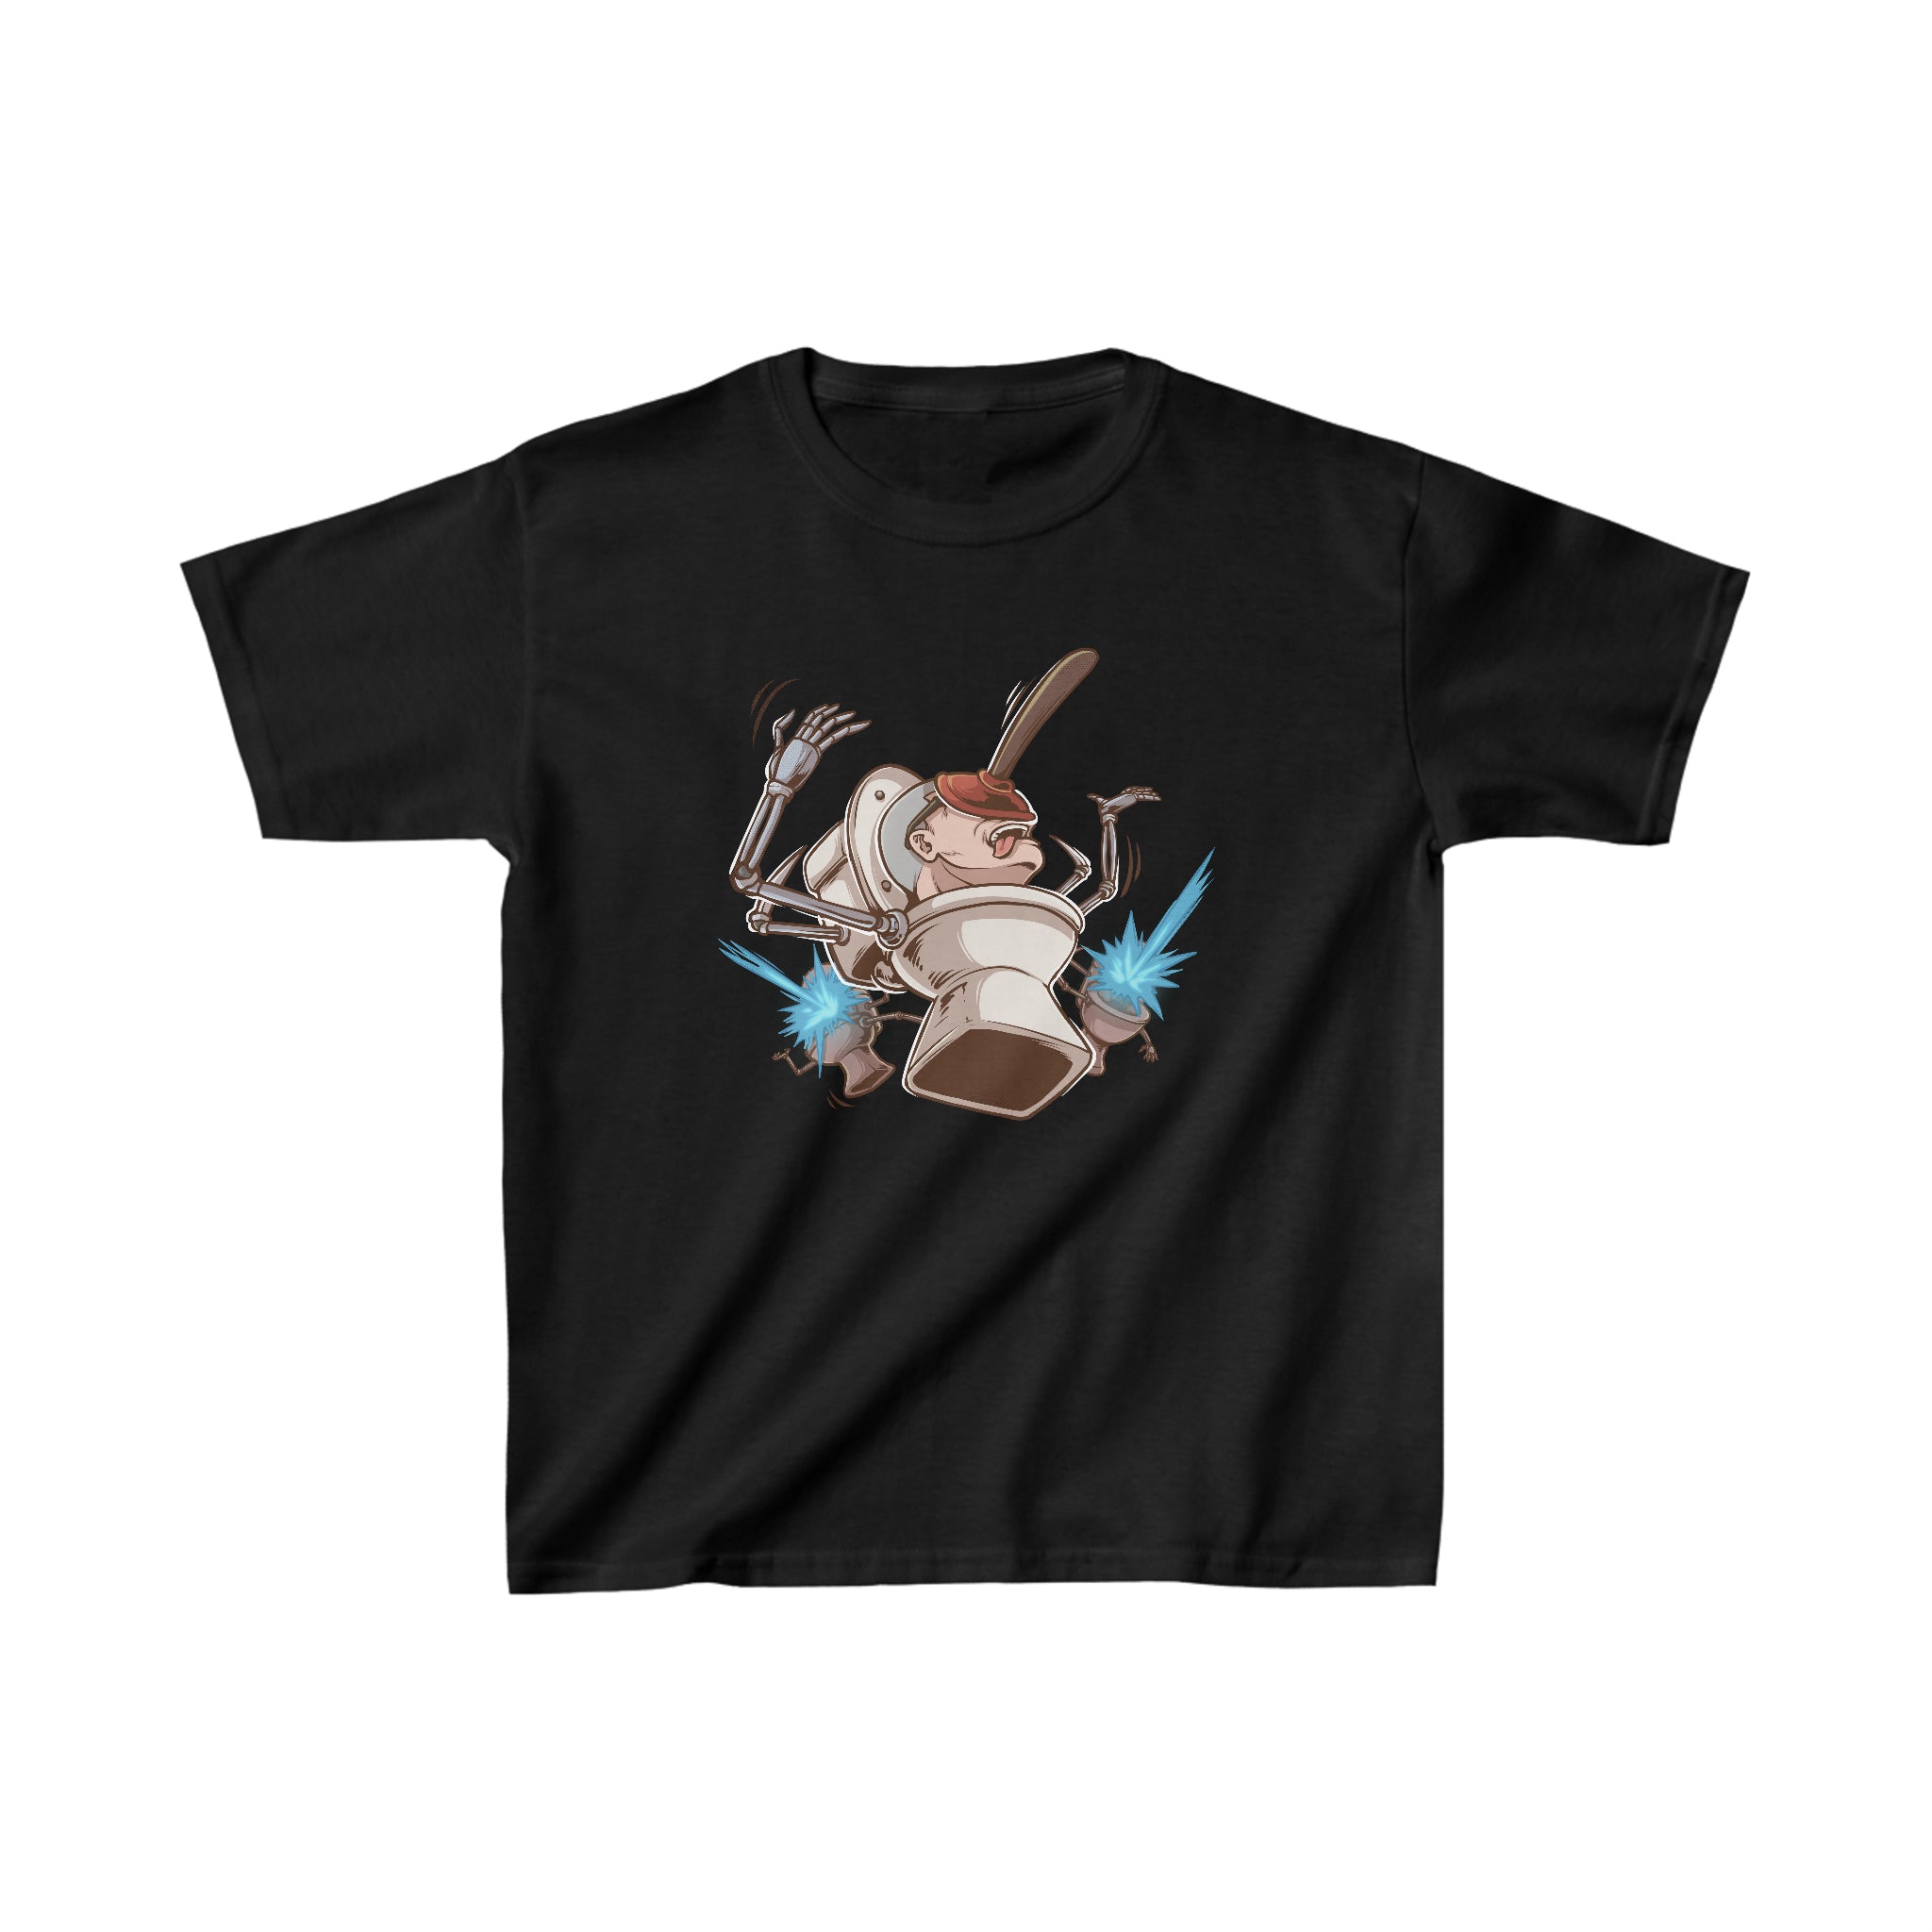 Plunger Face Tee - Youth